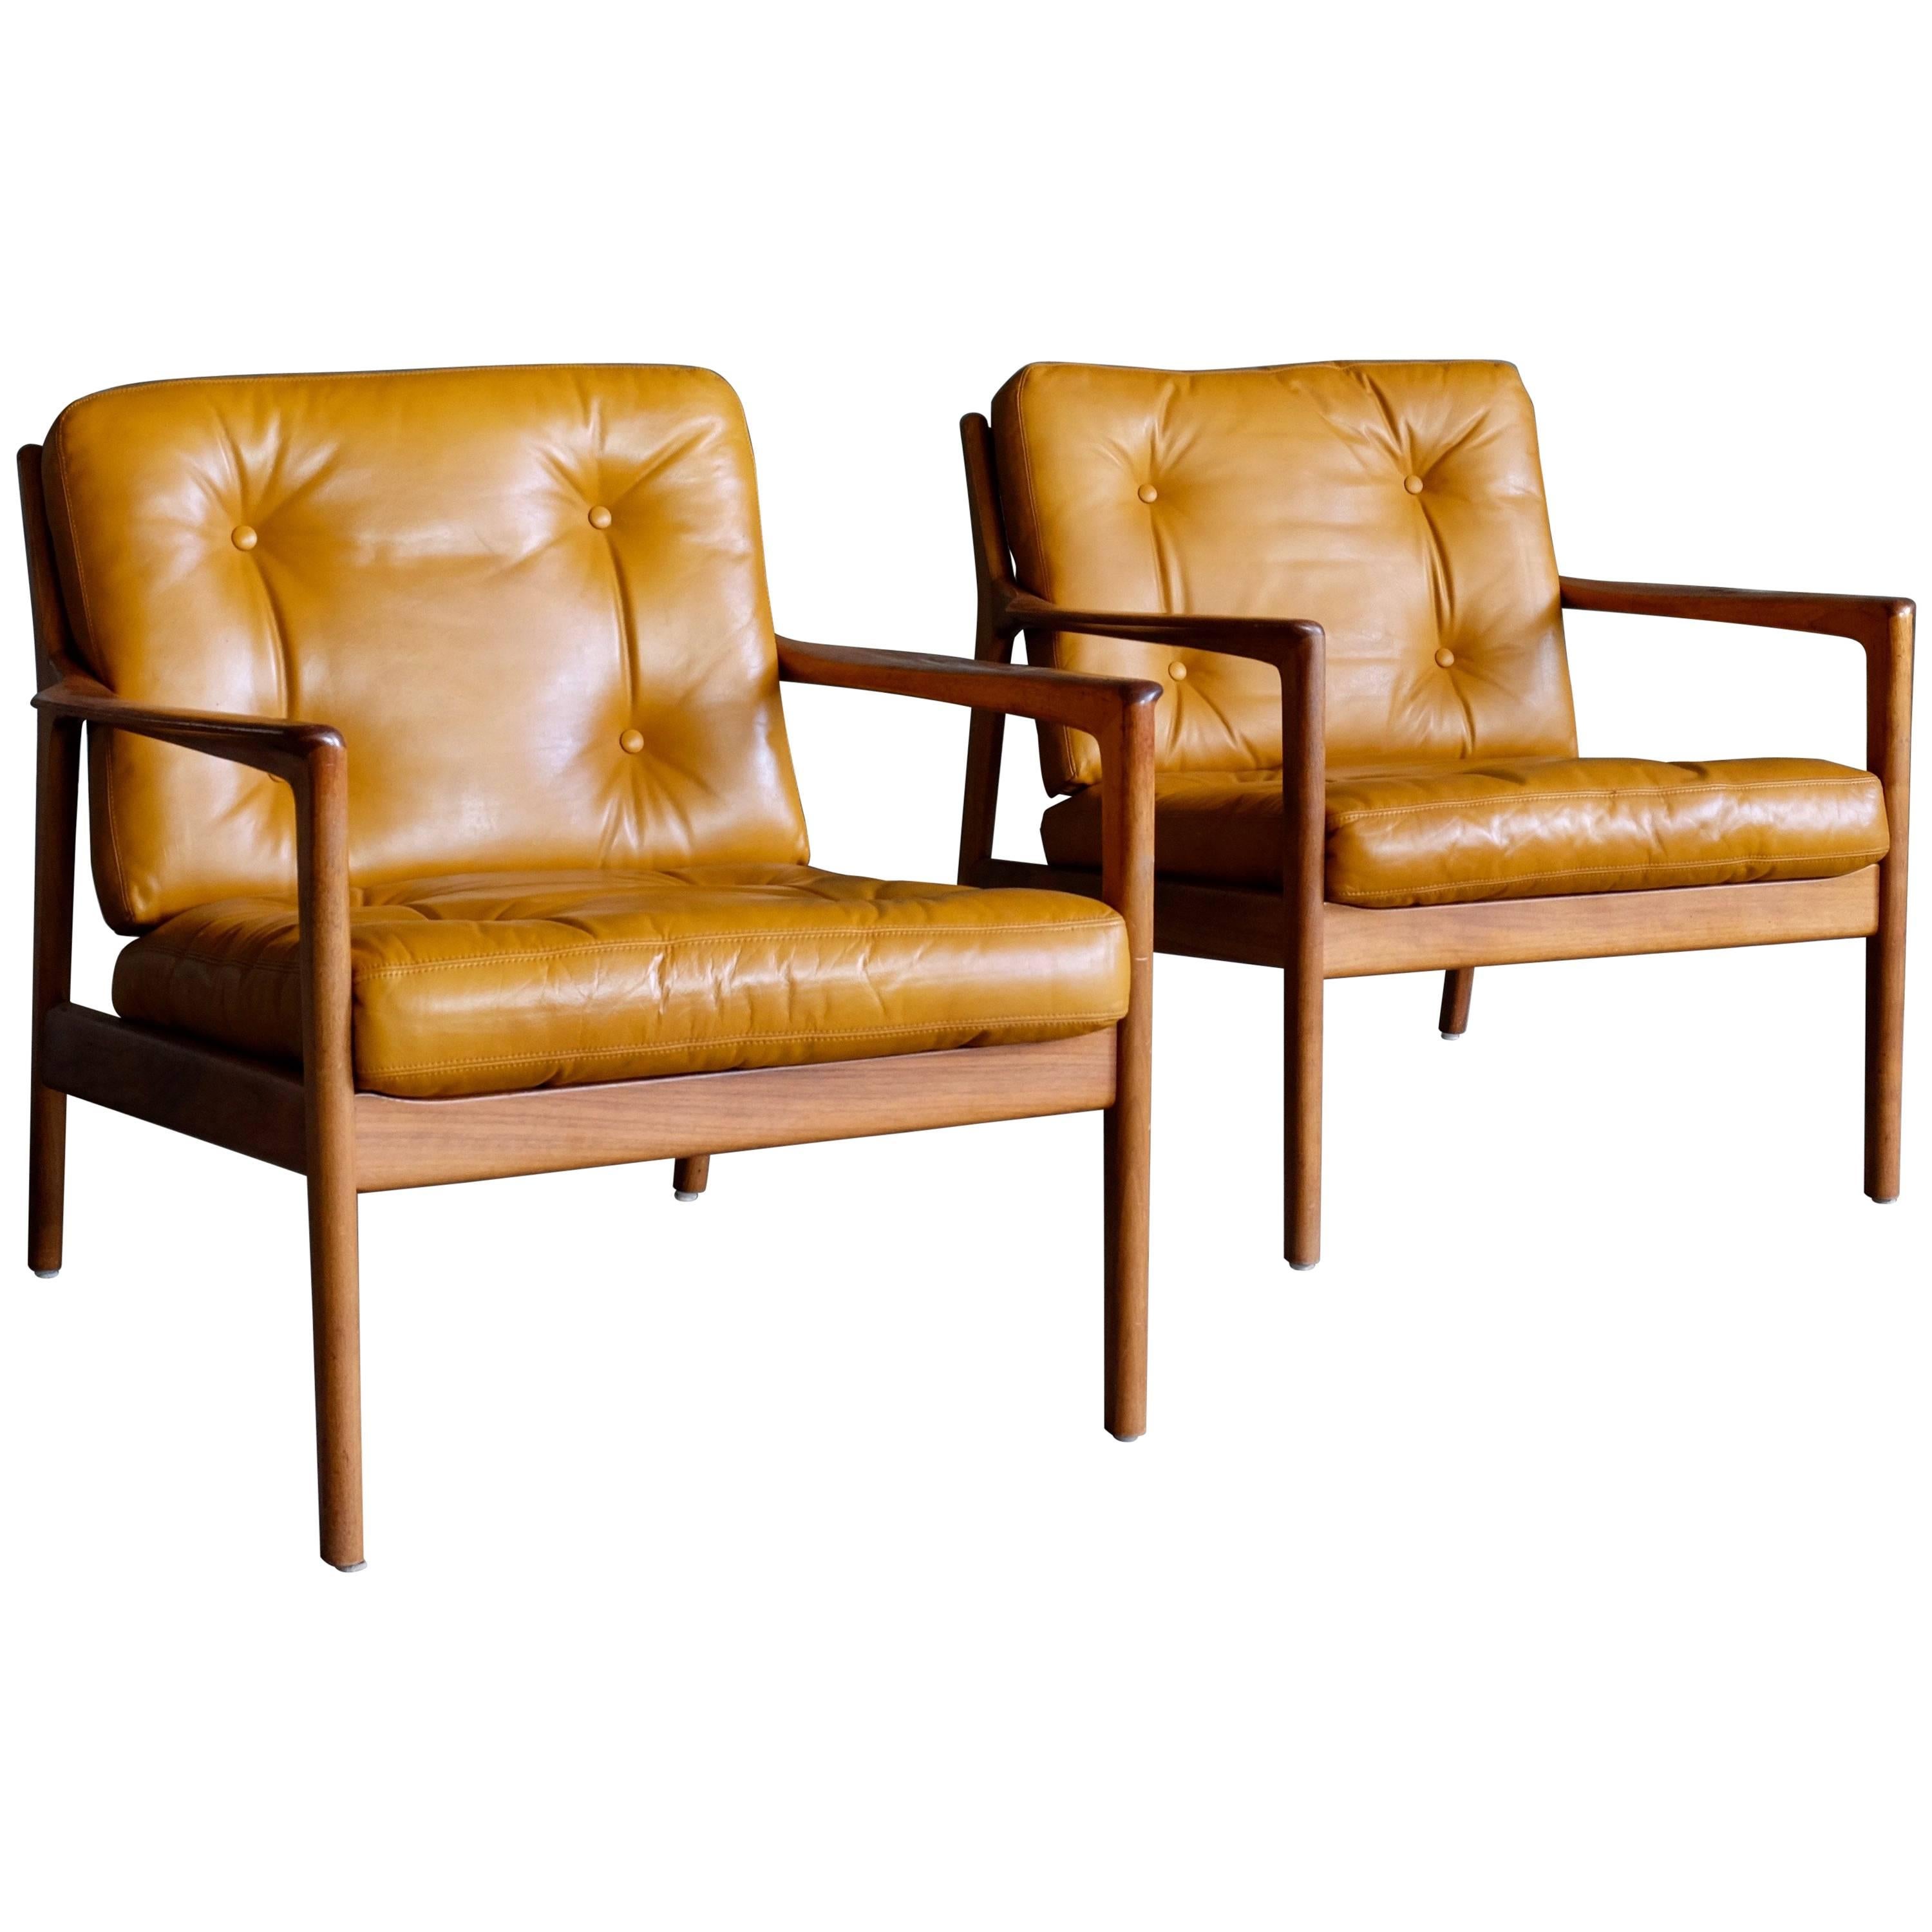 Pair of USA-75 by Folke Ohlsson for DUX, 1950s